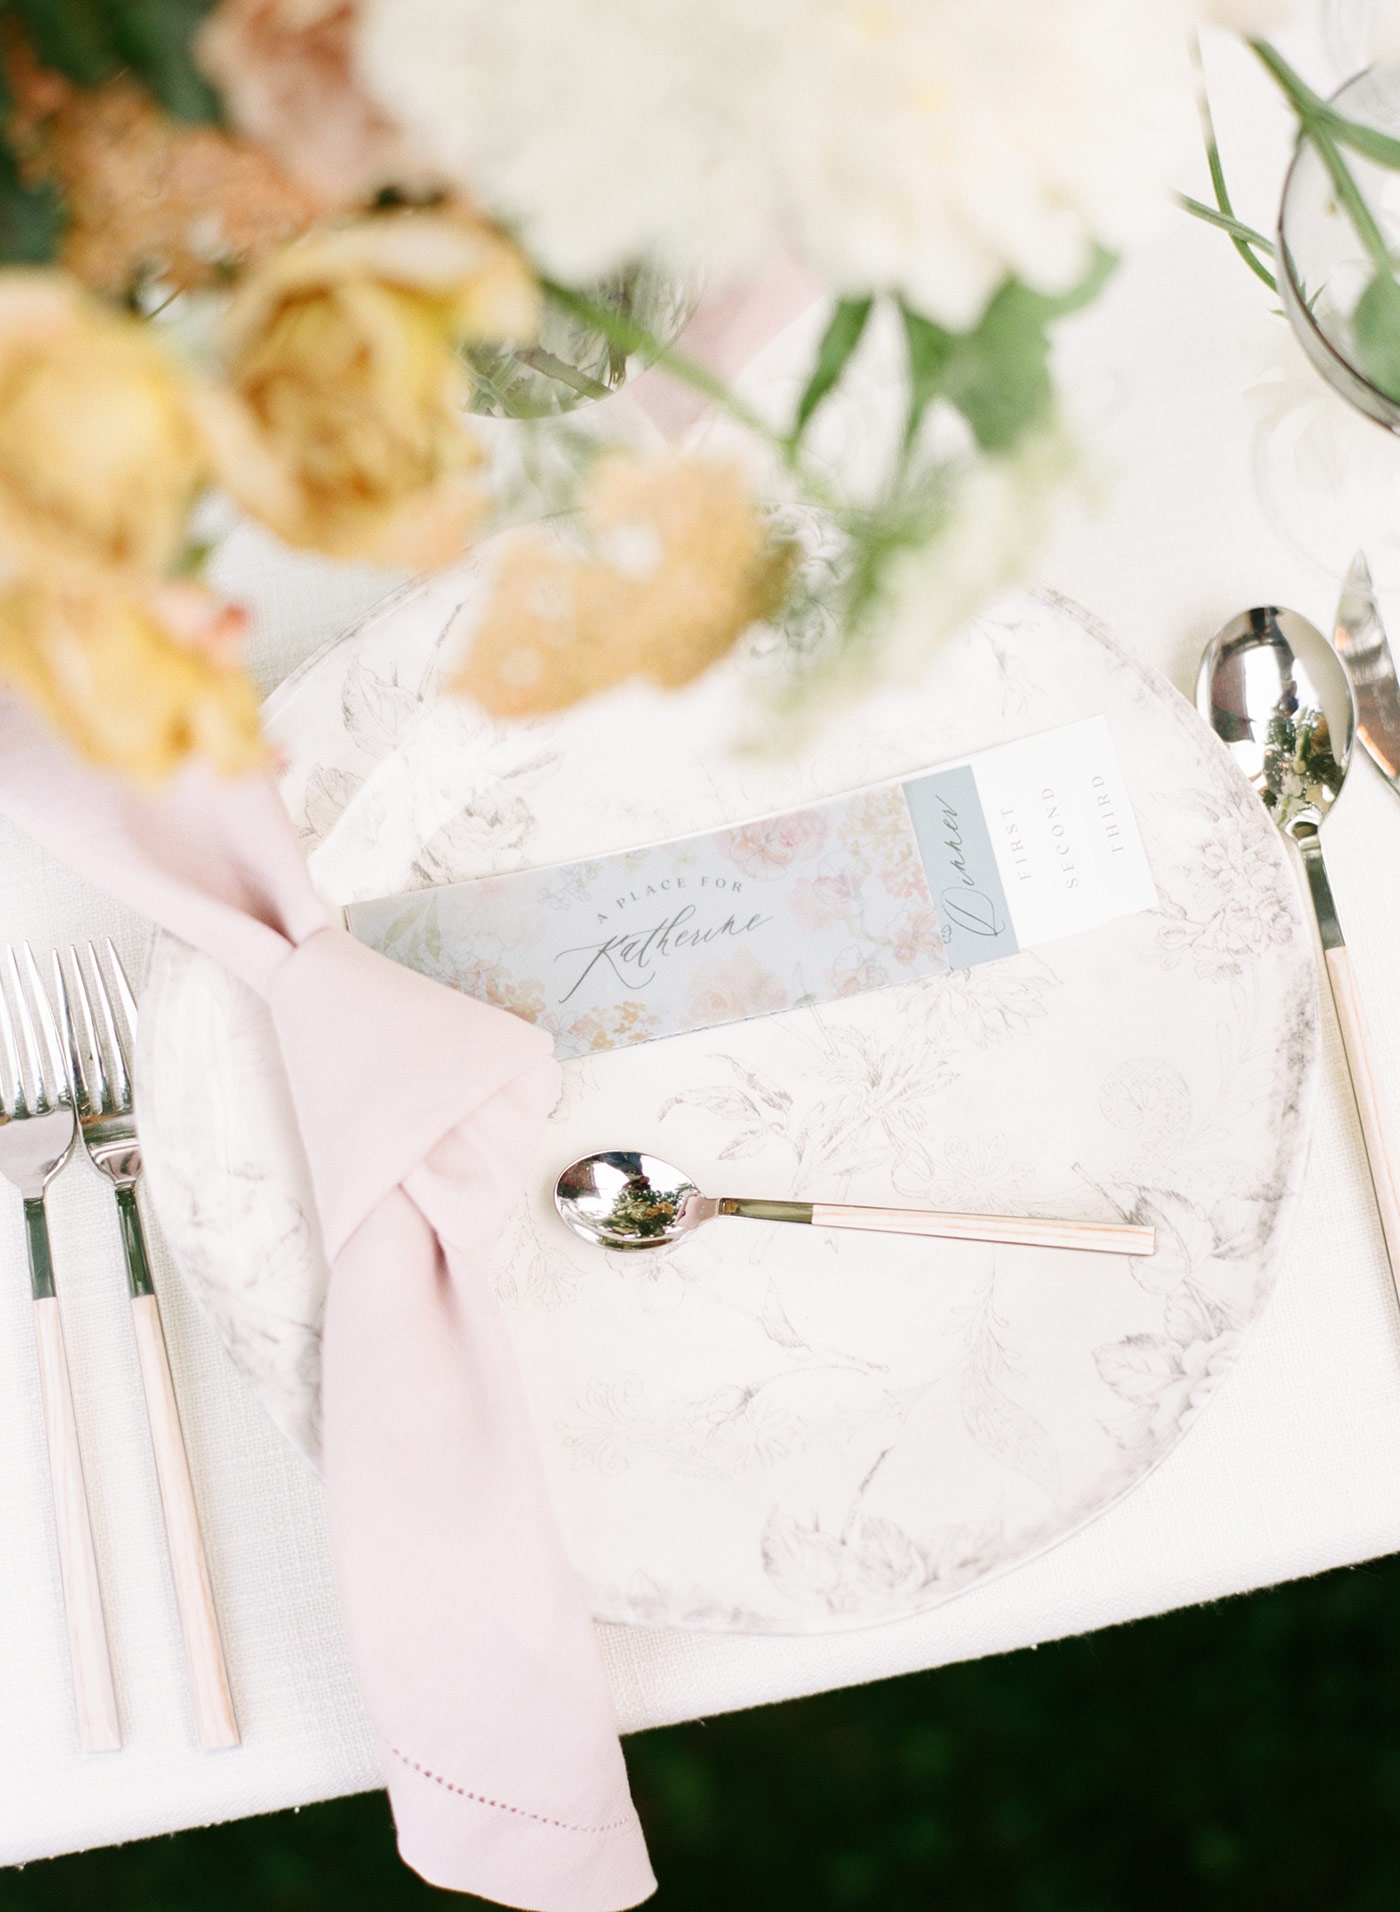 How to plan an intimate wedding - Verve Event Co.